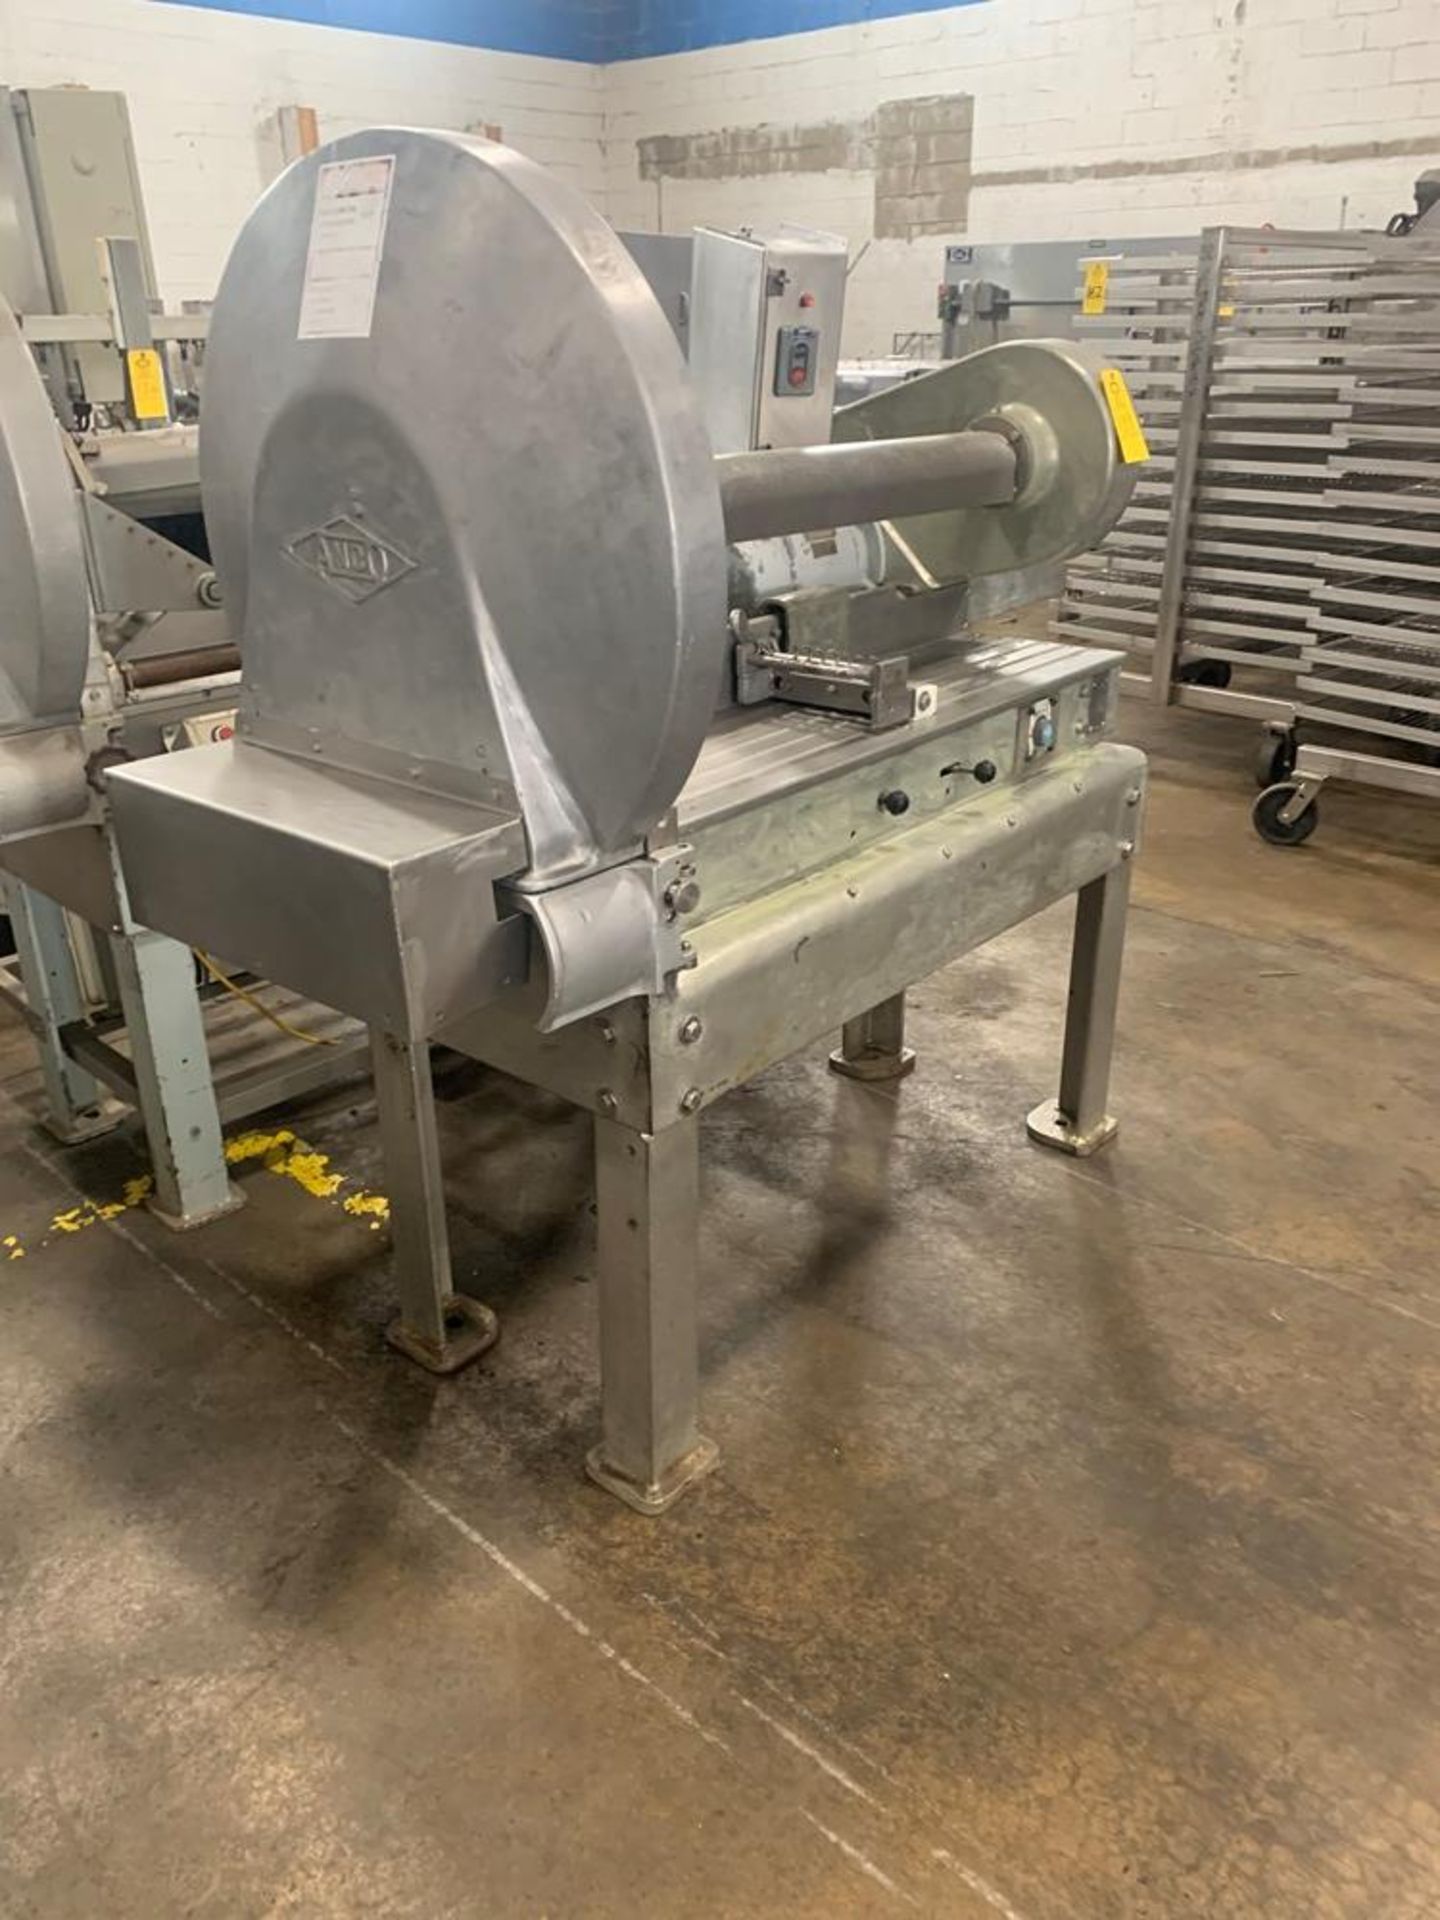 Anco Mdl. 827 Ram Feed Bacon Slicer, re-tinned (Located in Plano, IL) - Image 7 of 7